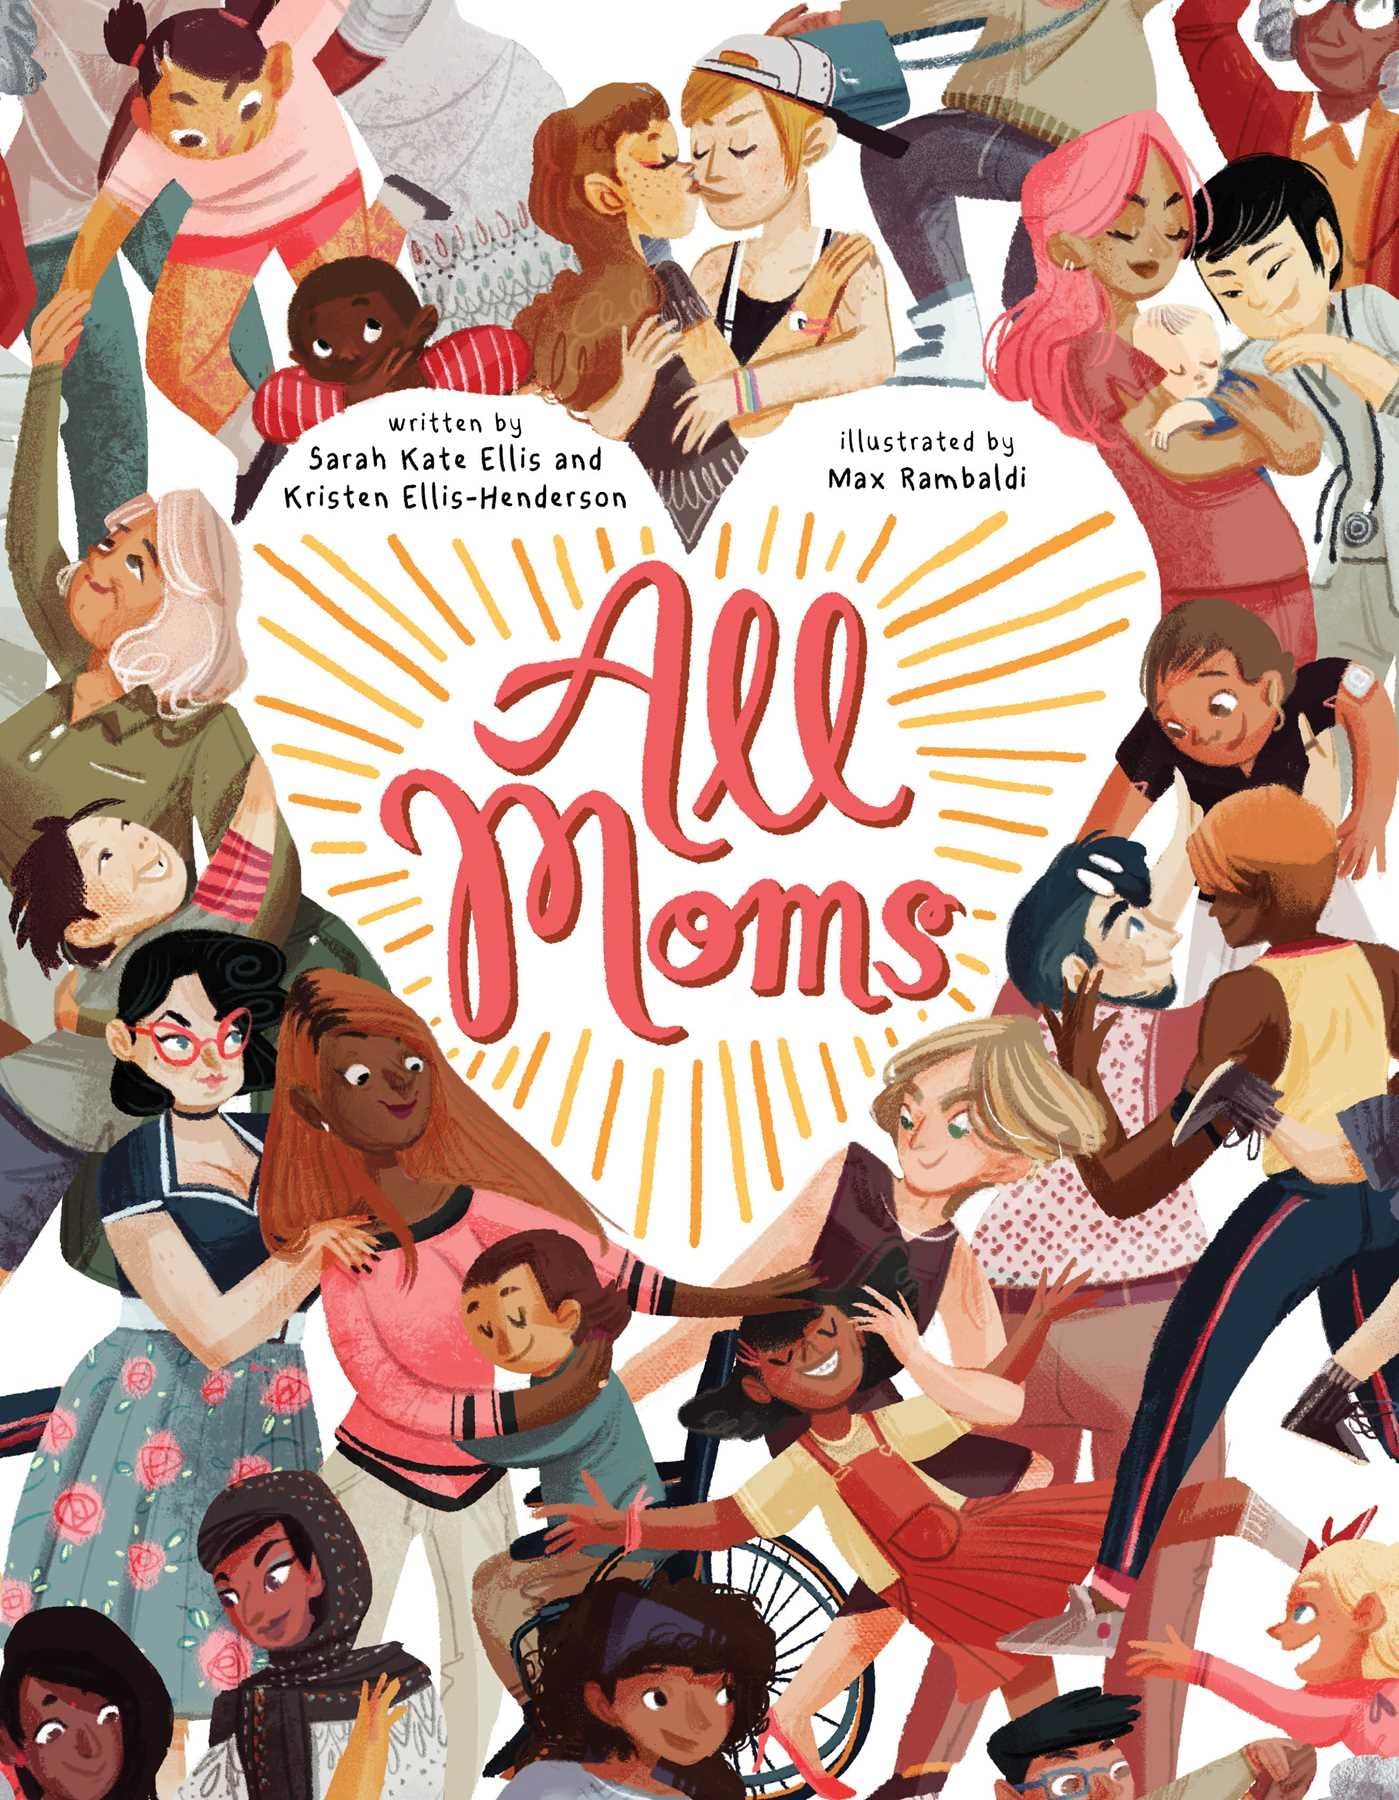 Cover with title and illustrations of various moms